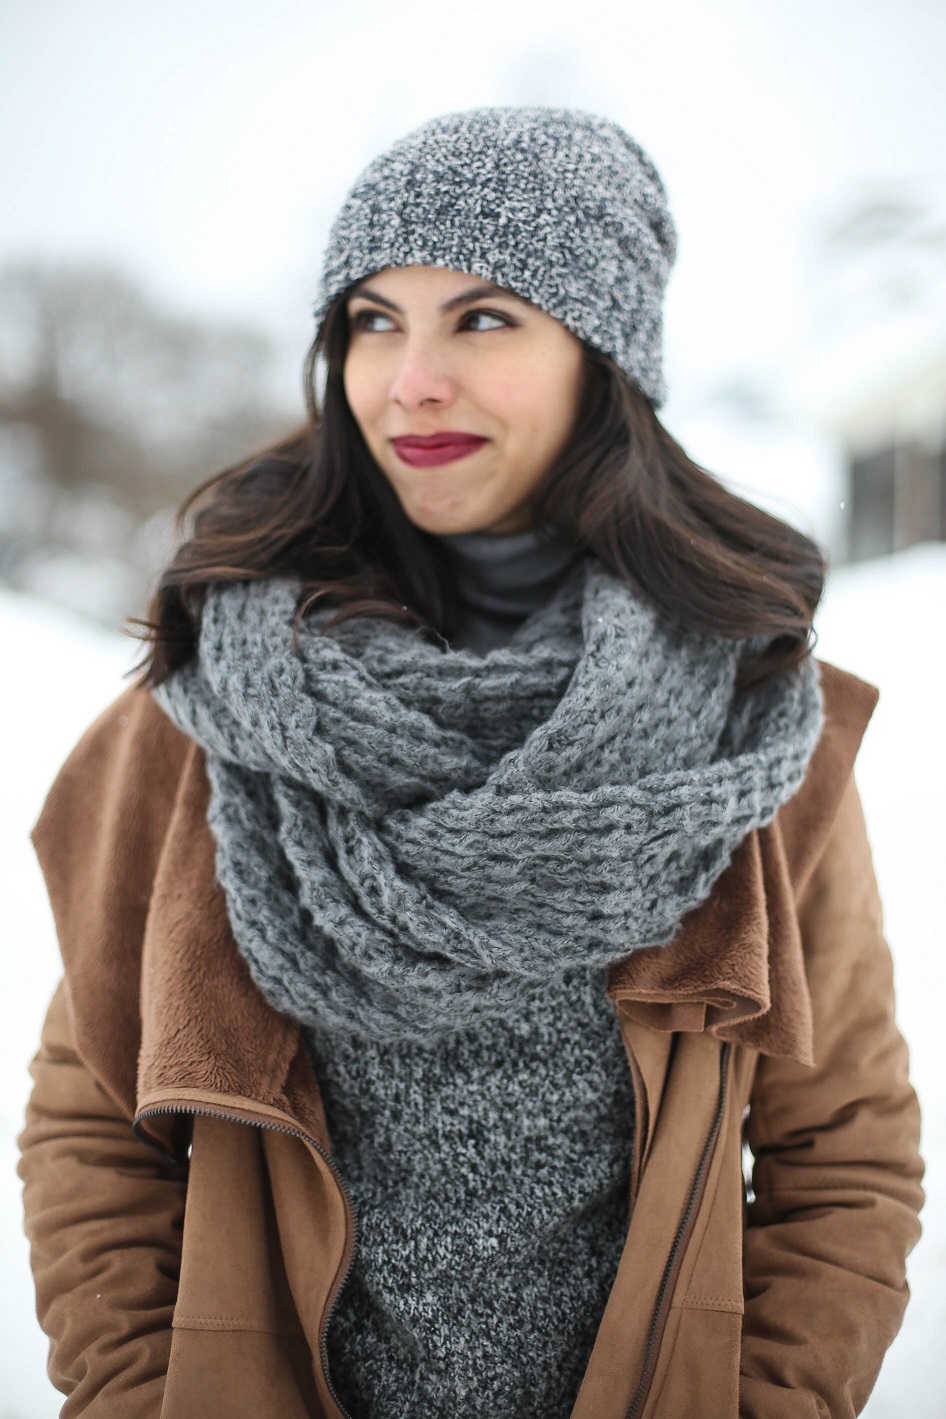 austin style blogger, casual winter look ideas, forever 21 beanie, asos scarf, forever 21 denim jeans, austin texas style blogger, austin fashion blogger, austin texas fashion blog